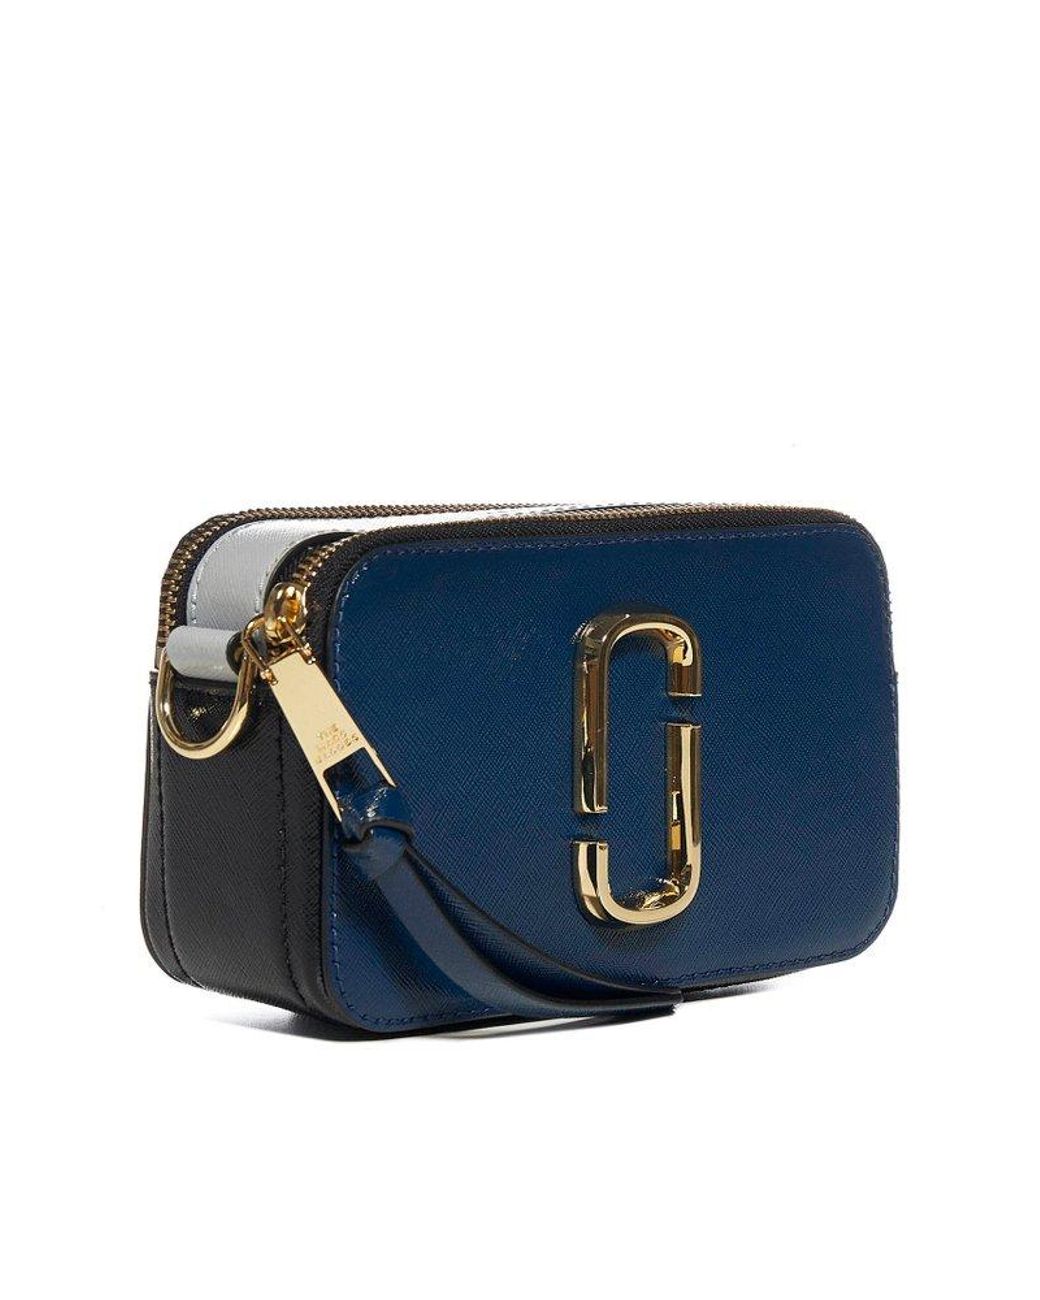 Marc Jacobs Snapshot Bag Blue - $101 - From Laila